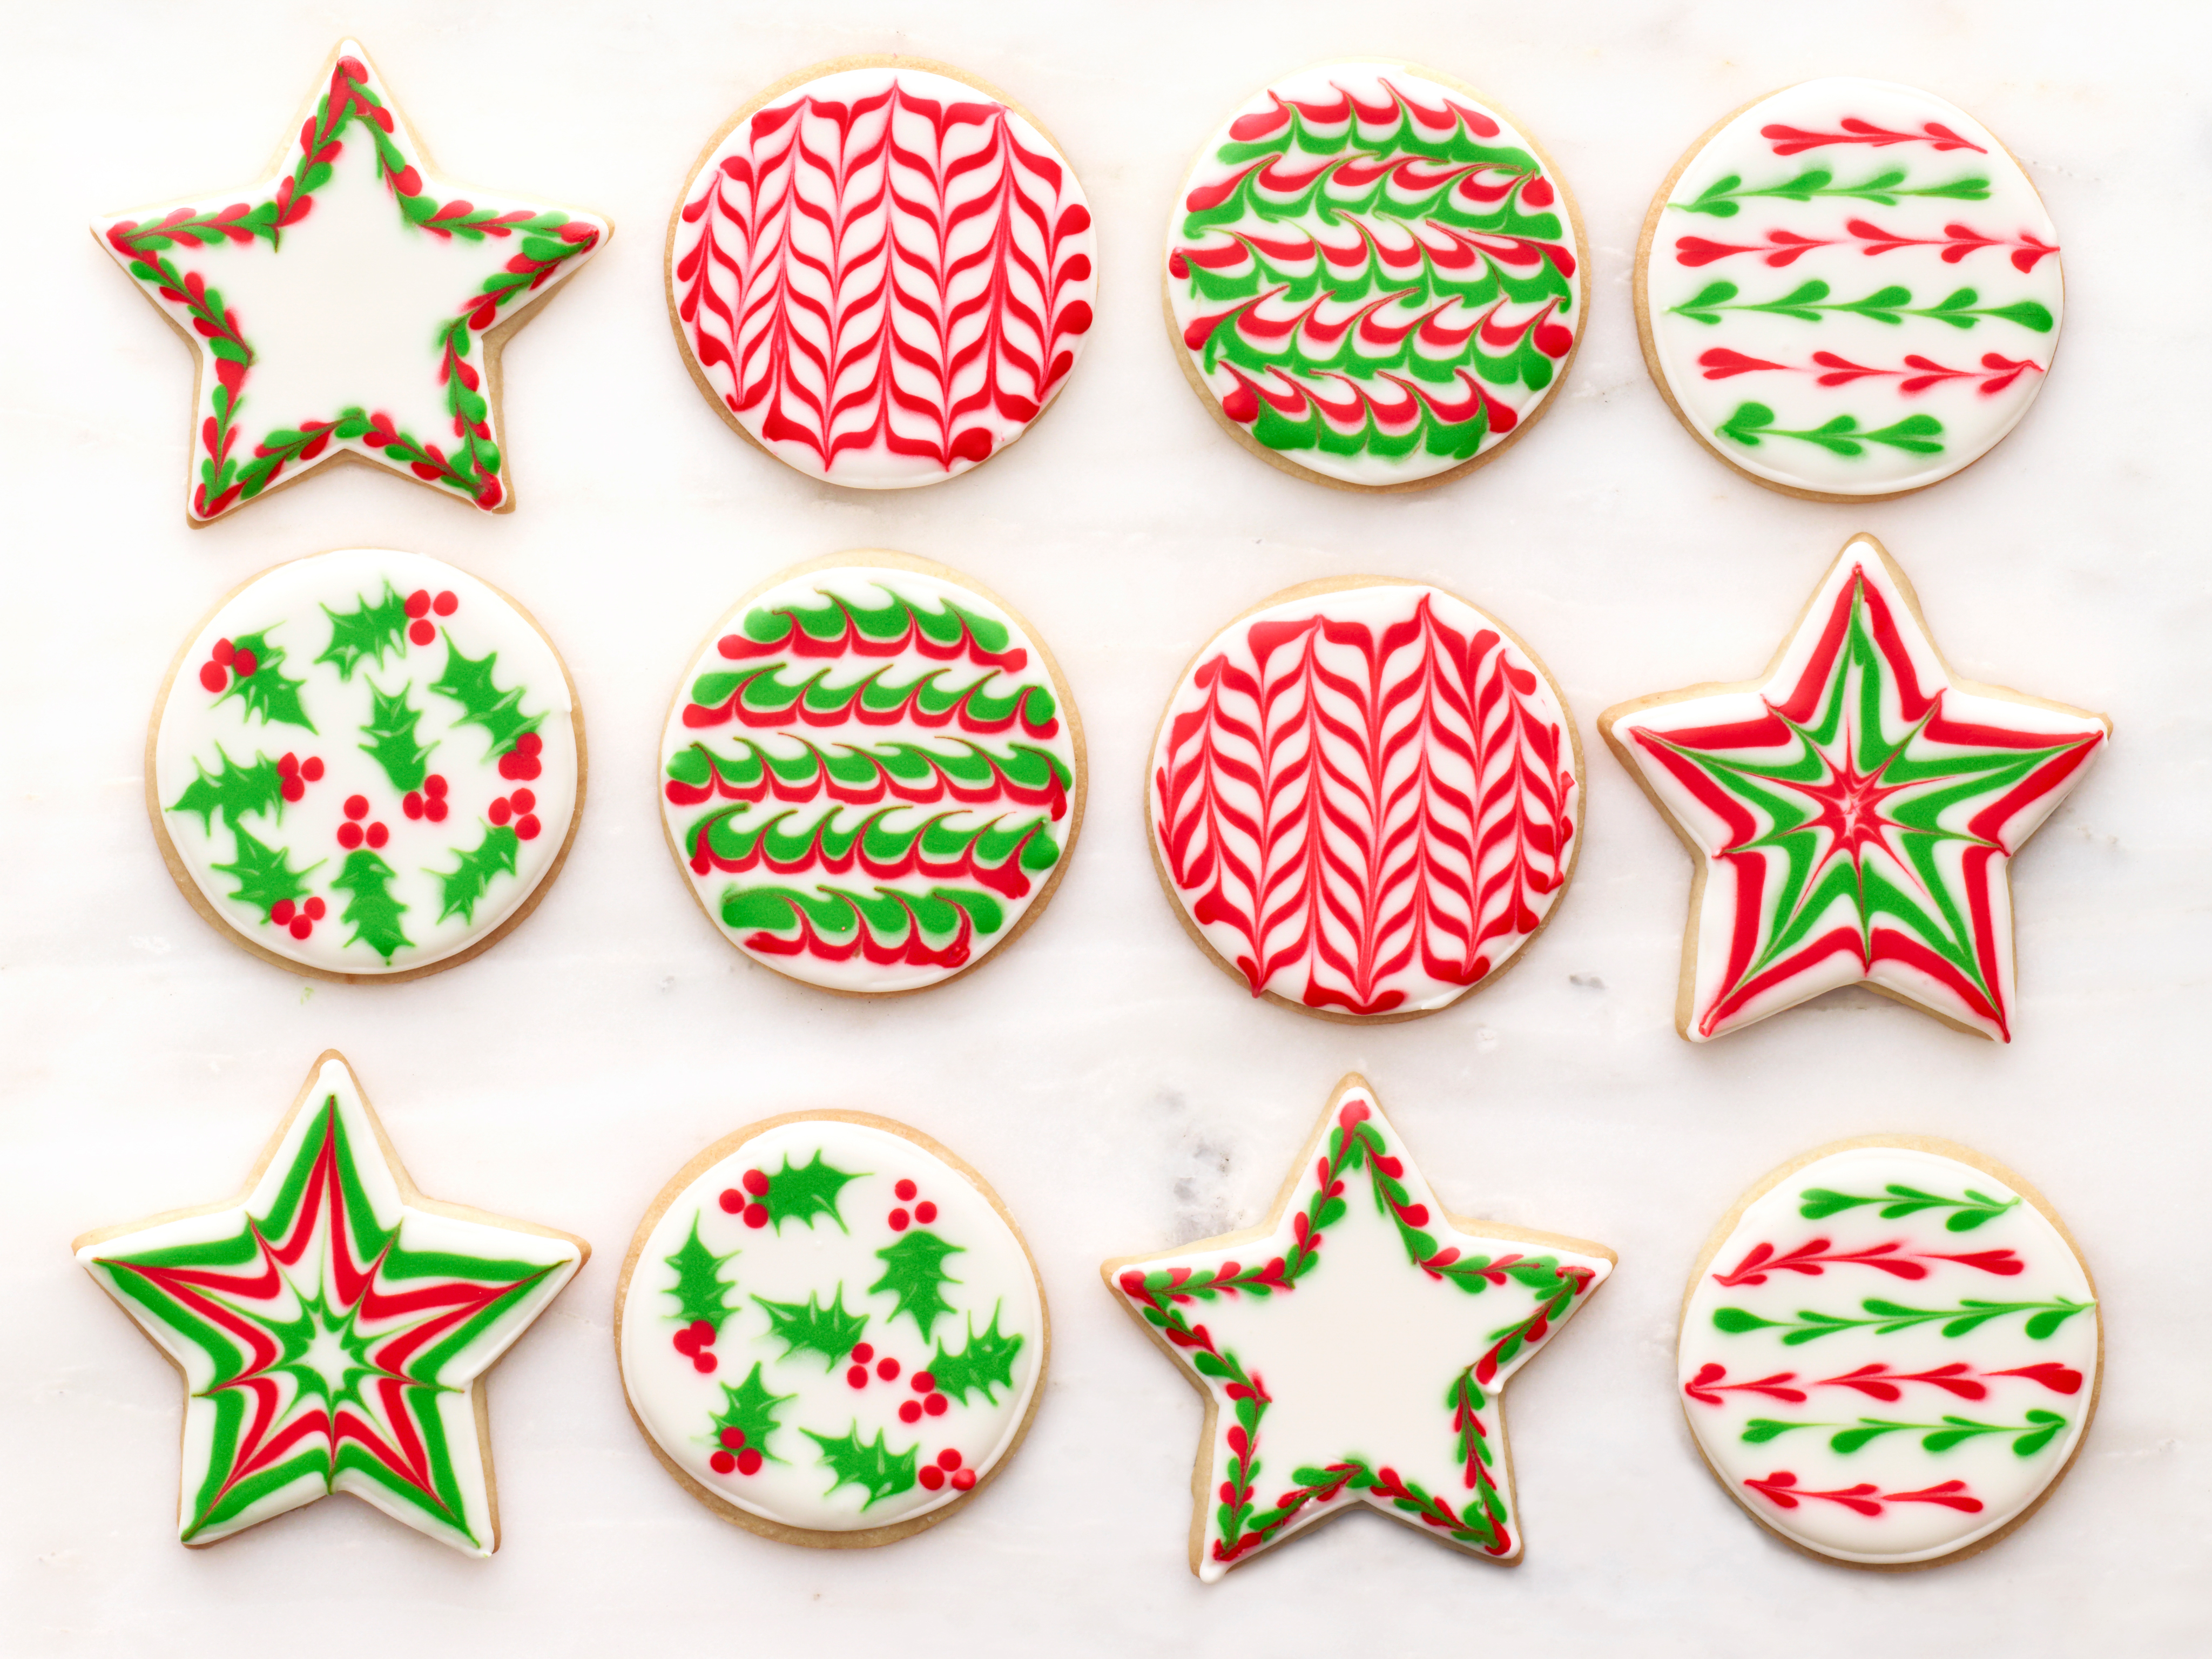 How to make decorating icing for cookies from scratch